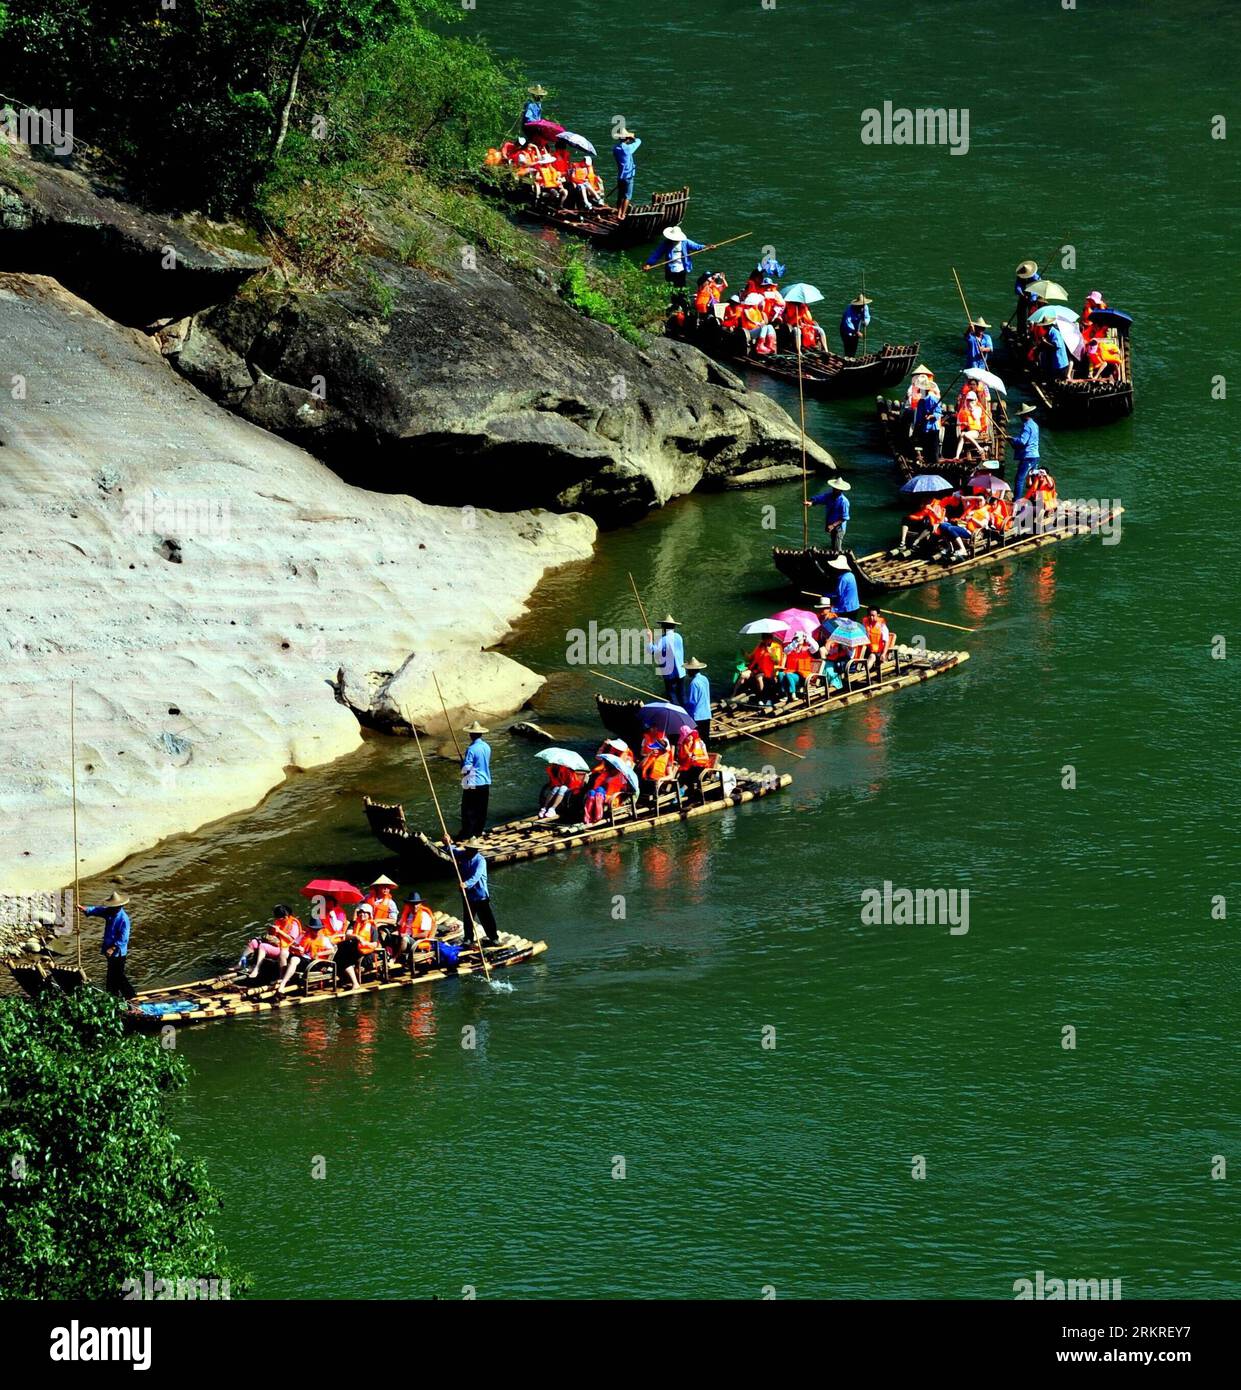 Bildnummer: 58224449  Datum: 11.07.2012  Copyright: imago/Xinhua (120711) -- WUYISHAN, July 11, 2012 (Xinhua) -- Tourists view the scenery on bamboo rafts on the Jiuqu River of Wuyi Mountain in southeast China s Fujian Province, July 11, 2012. Wuyi Mountain, located at northwestern Fujian, attracted 4.27 million visitors during the first half of 2012, with a year-on-year growth rate of 17.9 percent. Meanwhile, tourism revenue of Wuyi Mountain this year increased about 20 percent to 7 billion RMB from that of the same period last year. (Xinhua/Zhang Guojun) (gjh) CHINA-FUJIAN-WUYISHAN-TOURISM ( Stock Photo